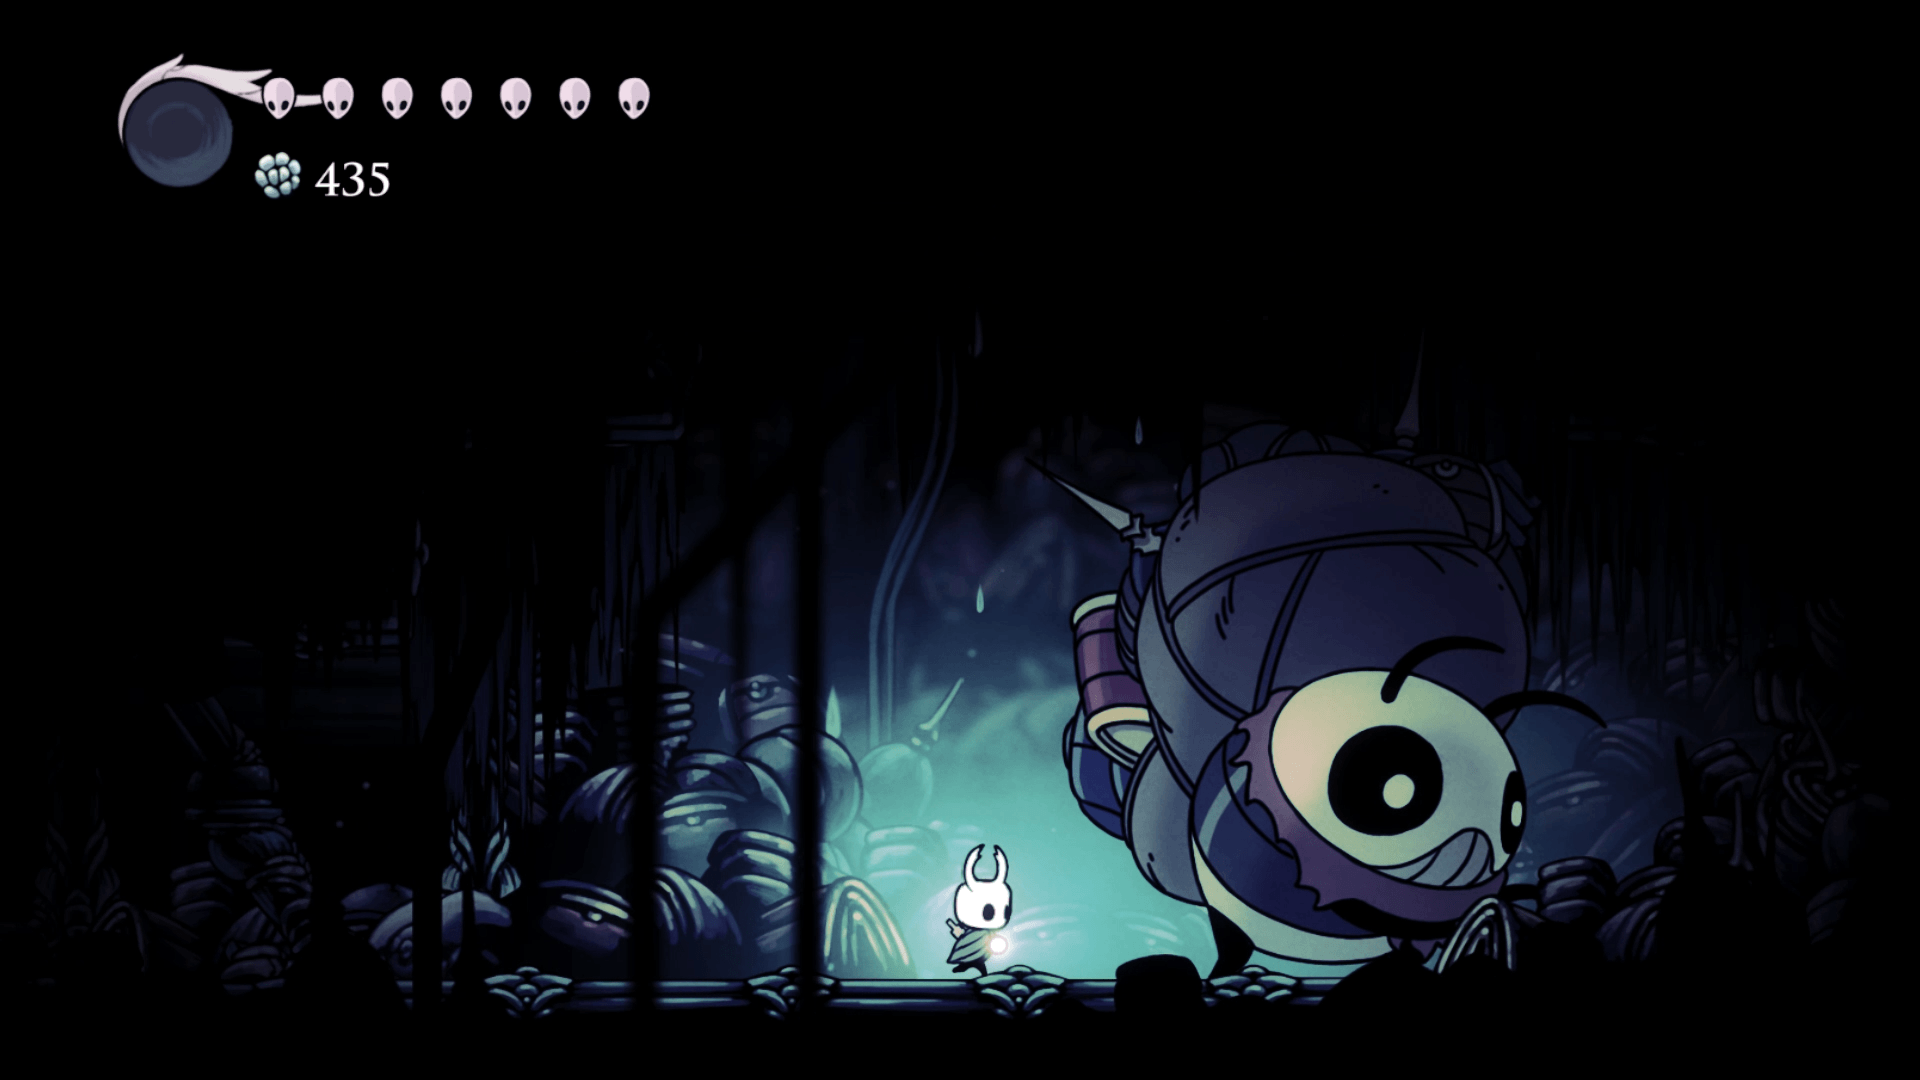 hollow knight download full